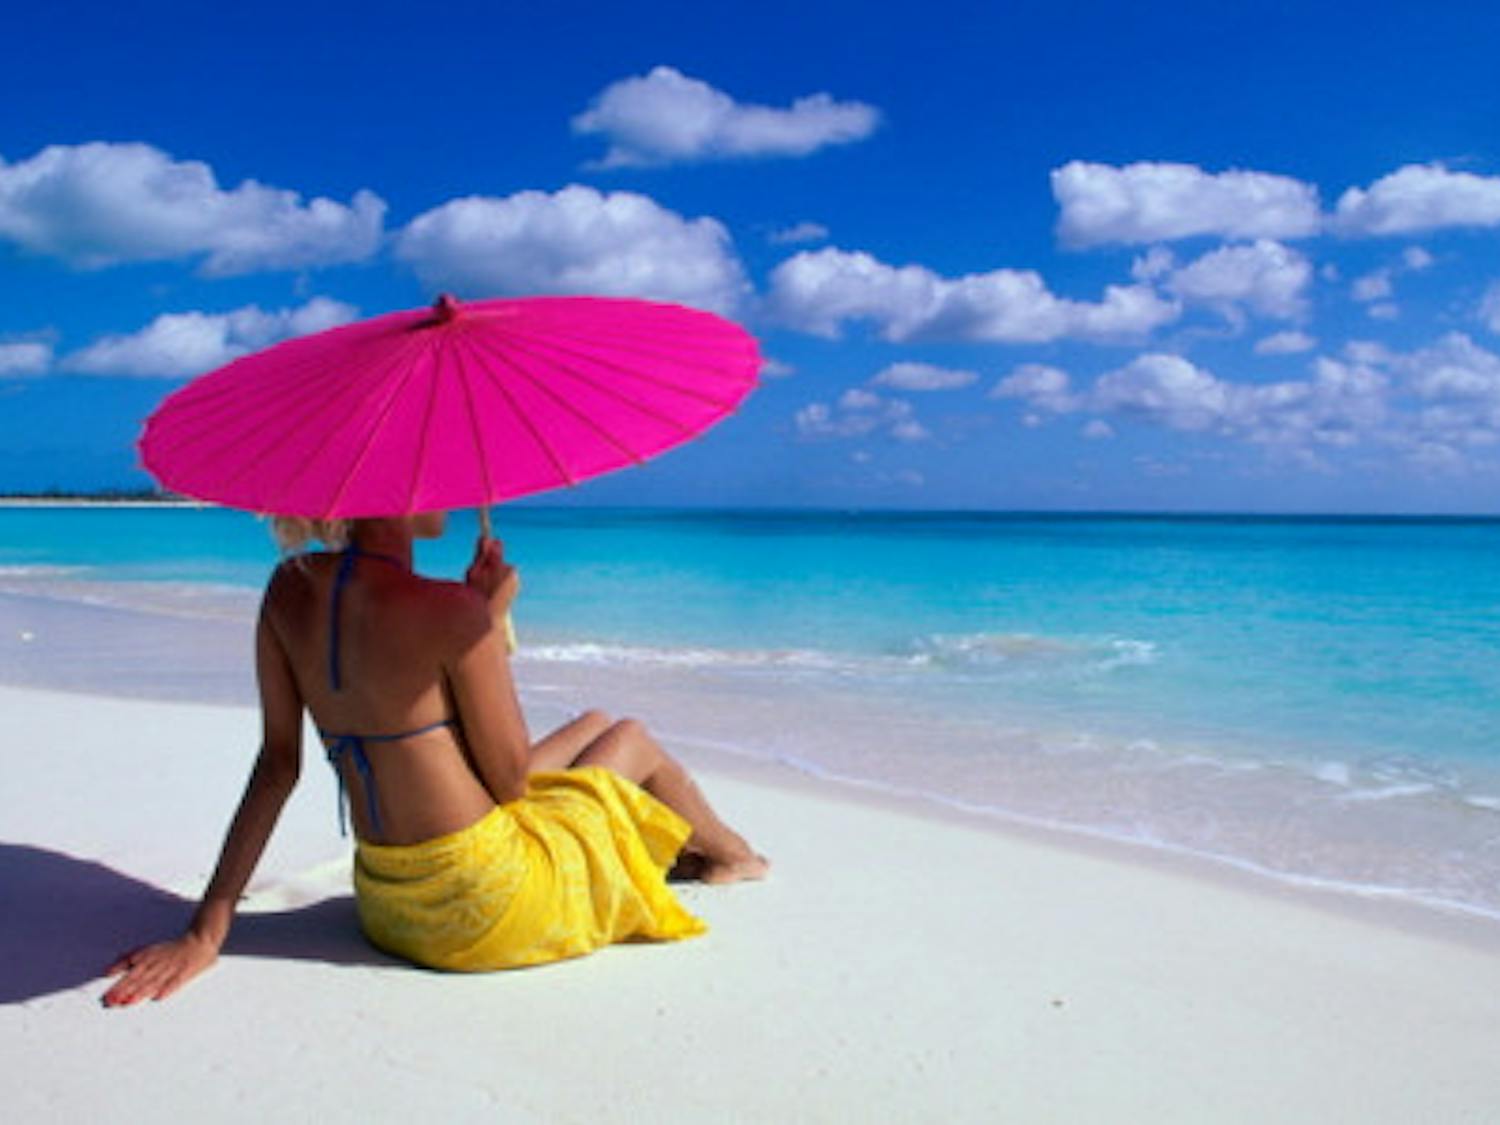 Follow these tips in order to have a safe and enjoyable time on the beach during vacation.